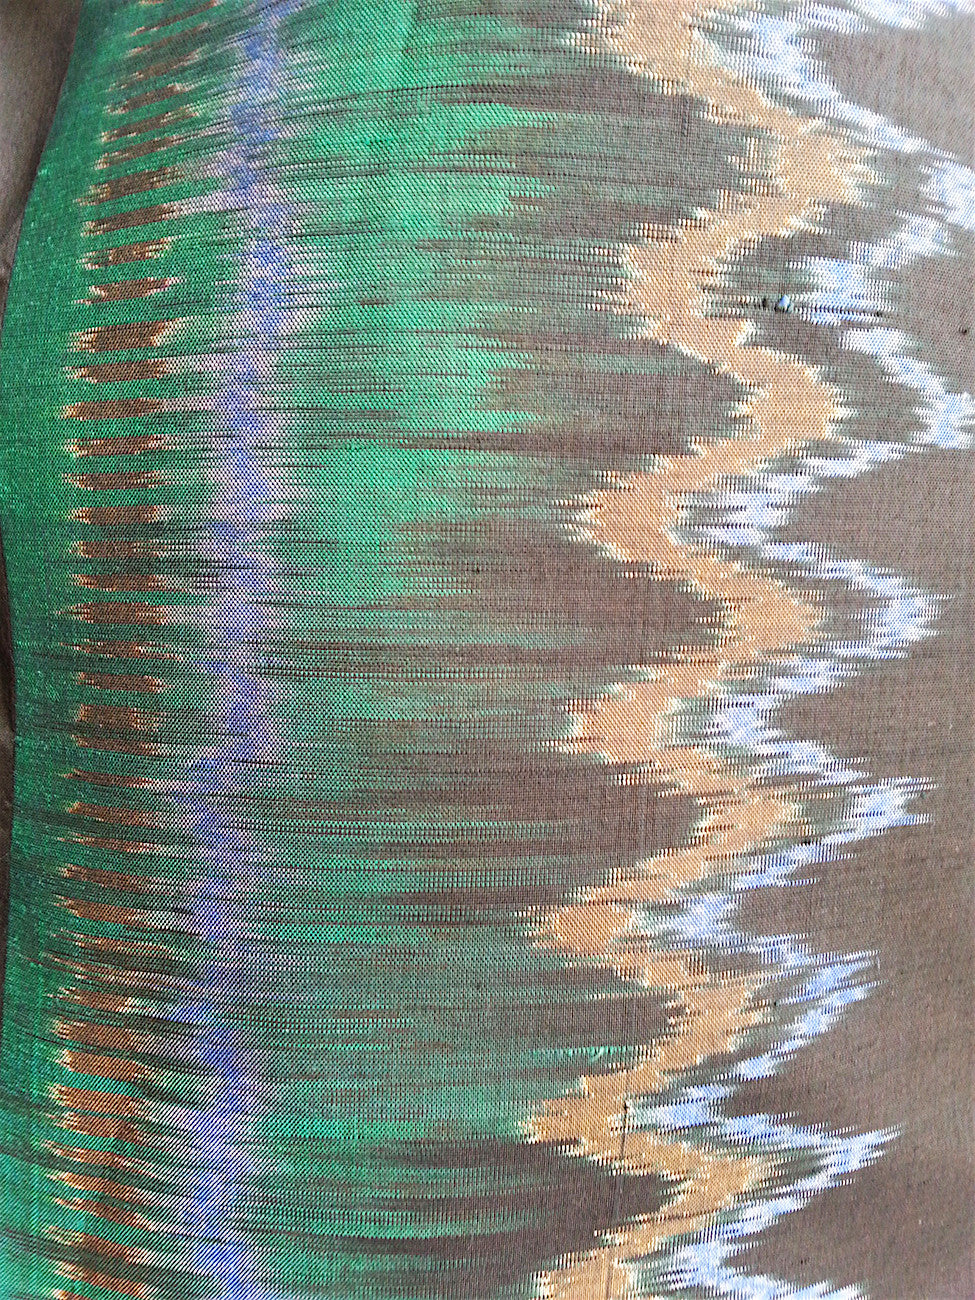 Modern Ikat Couture Cut Jacket Black and Green